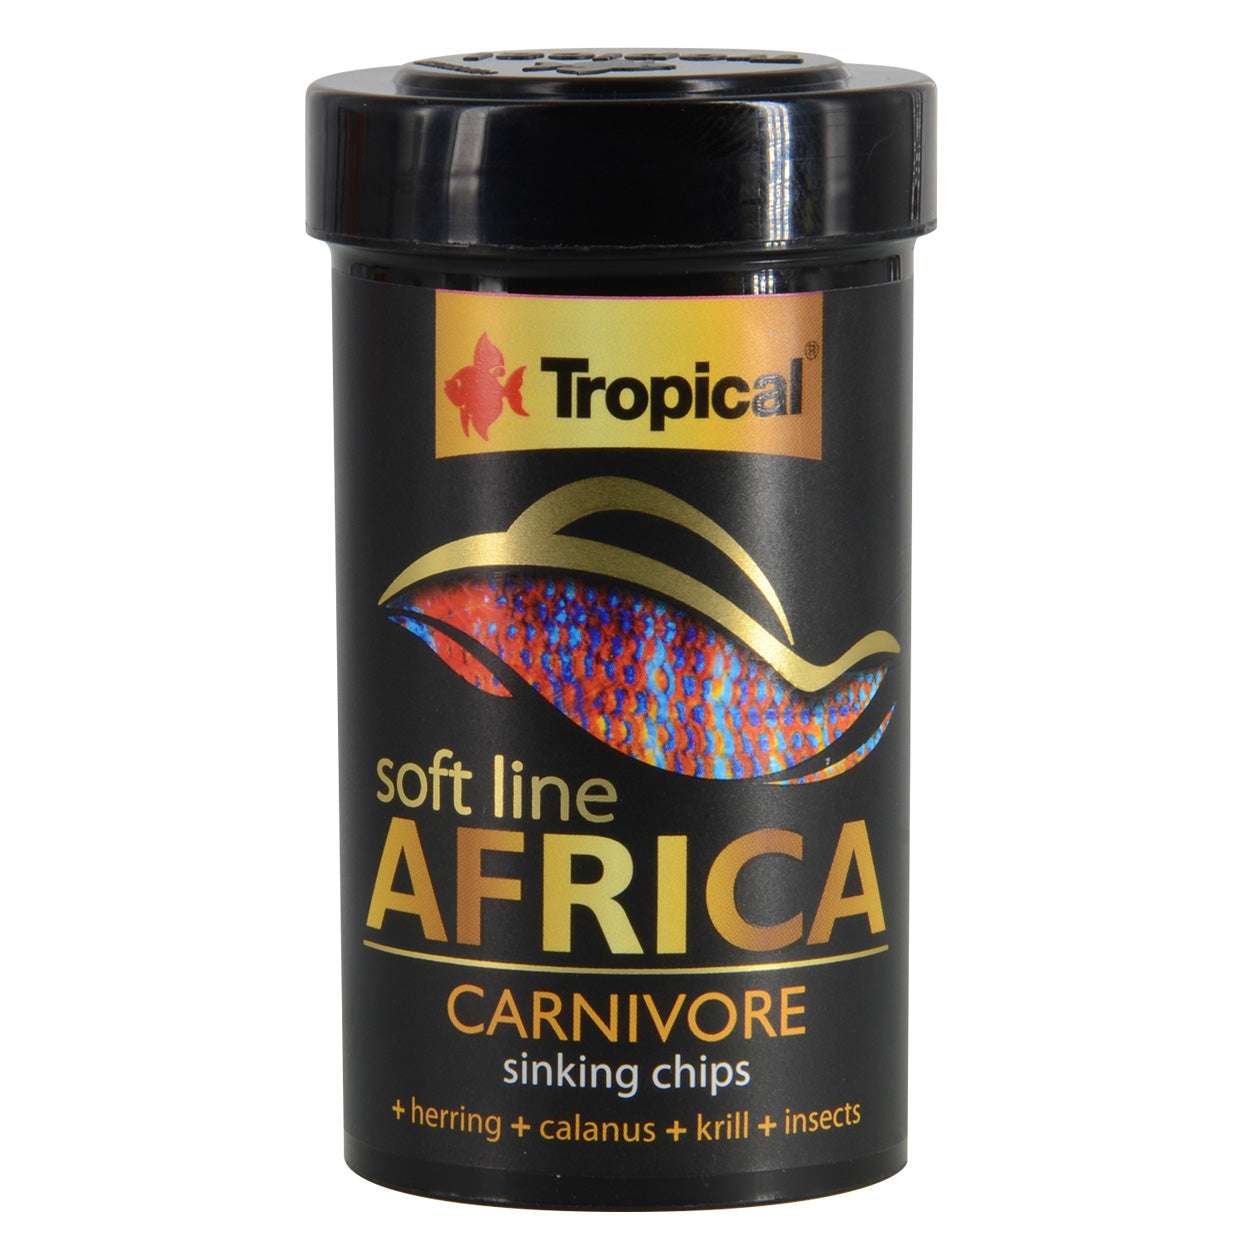 Tropical Africa Soft Line Carnivore Sinking Chips 52gr